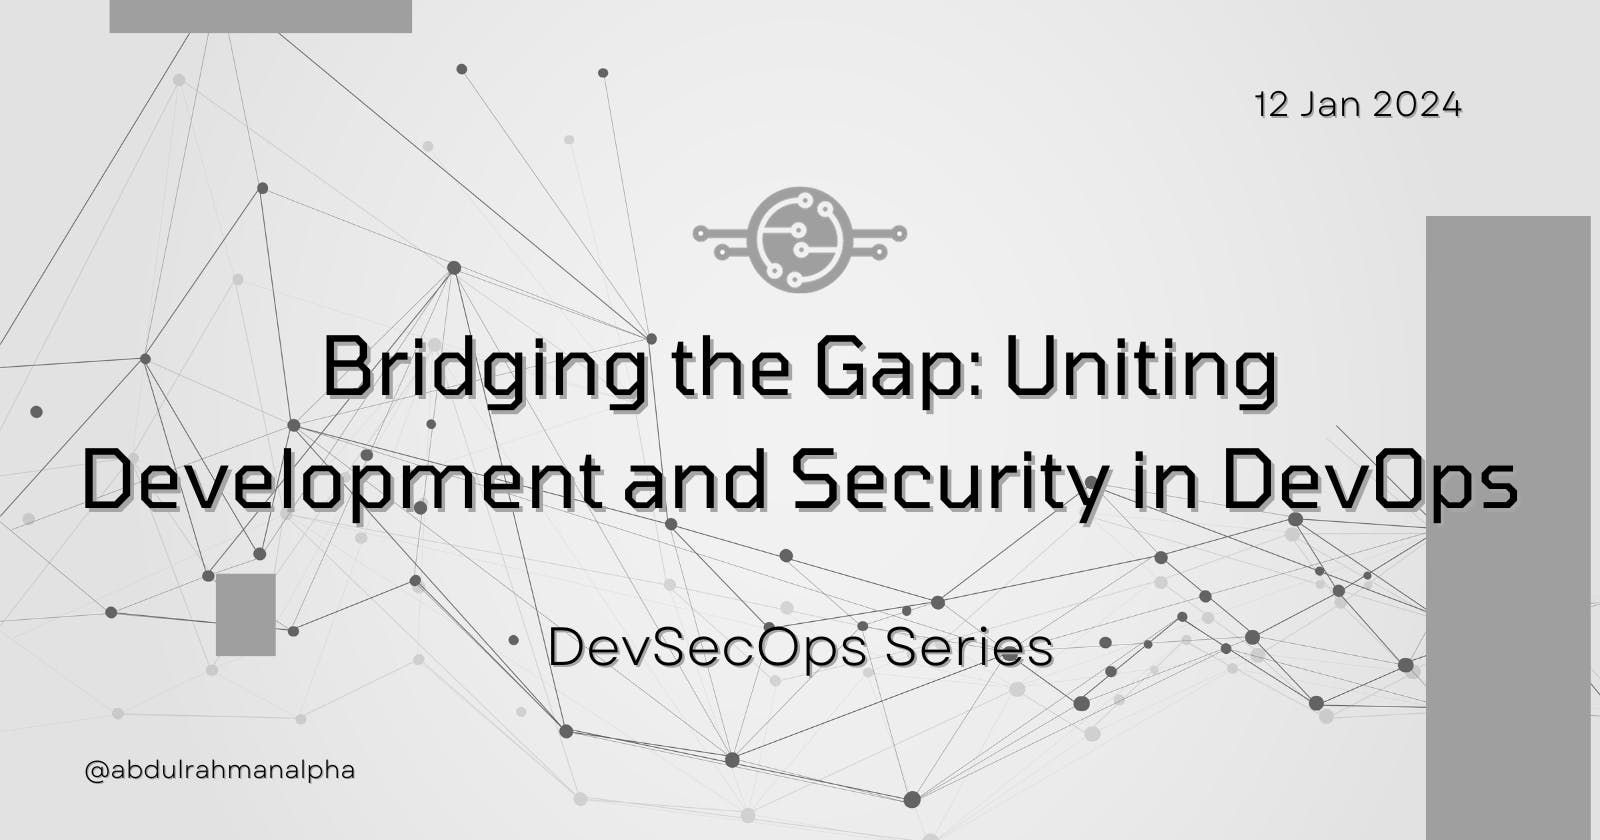 Bridging the Gap: Uniting Development and Security in DevOps